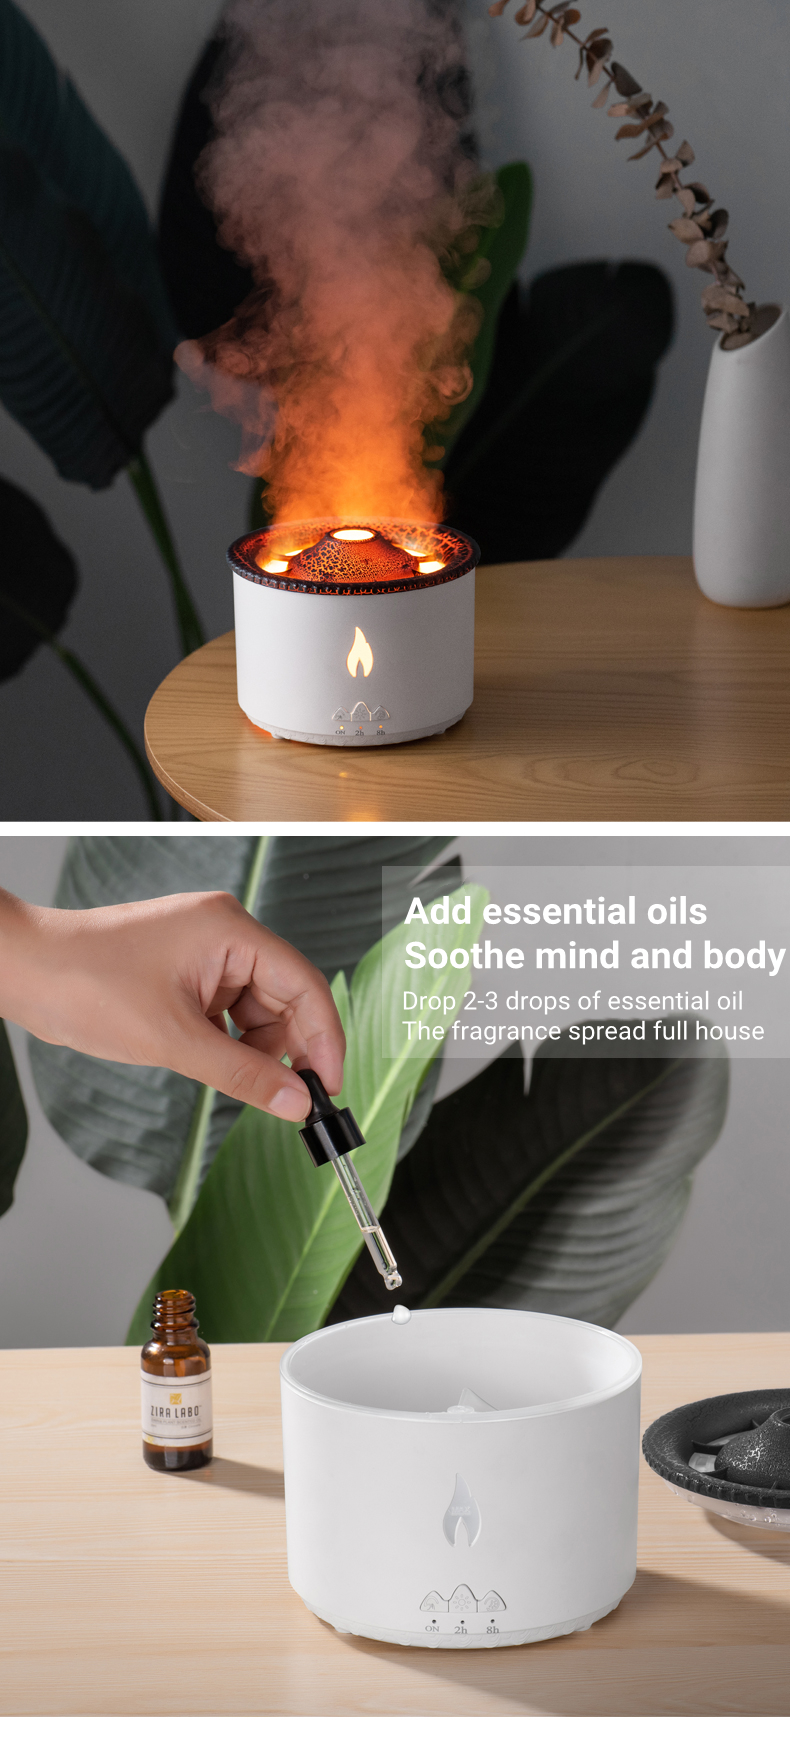 Cute Aroma Volcano Fire Flame Diffuser Humidifier For Aromatherapy  Essential Oil